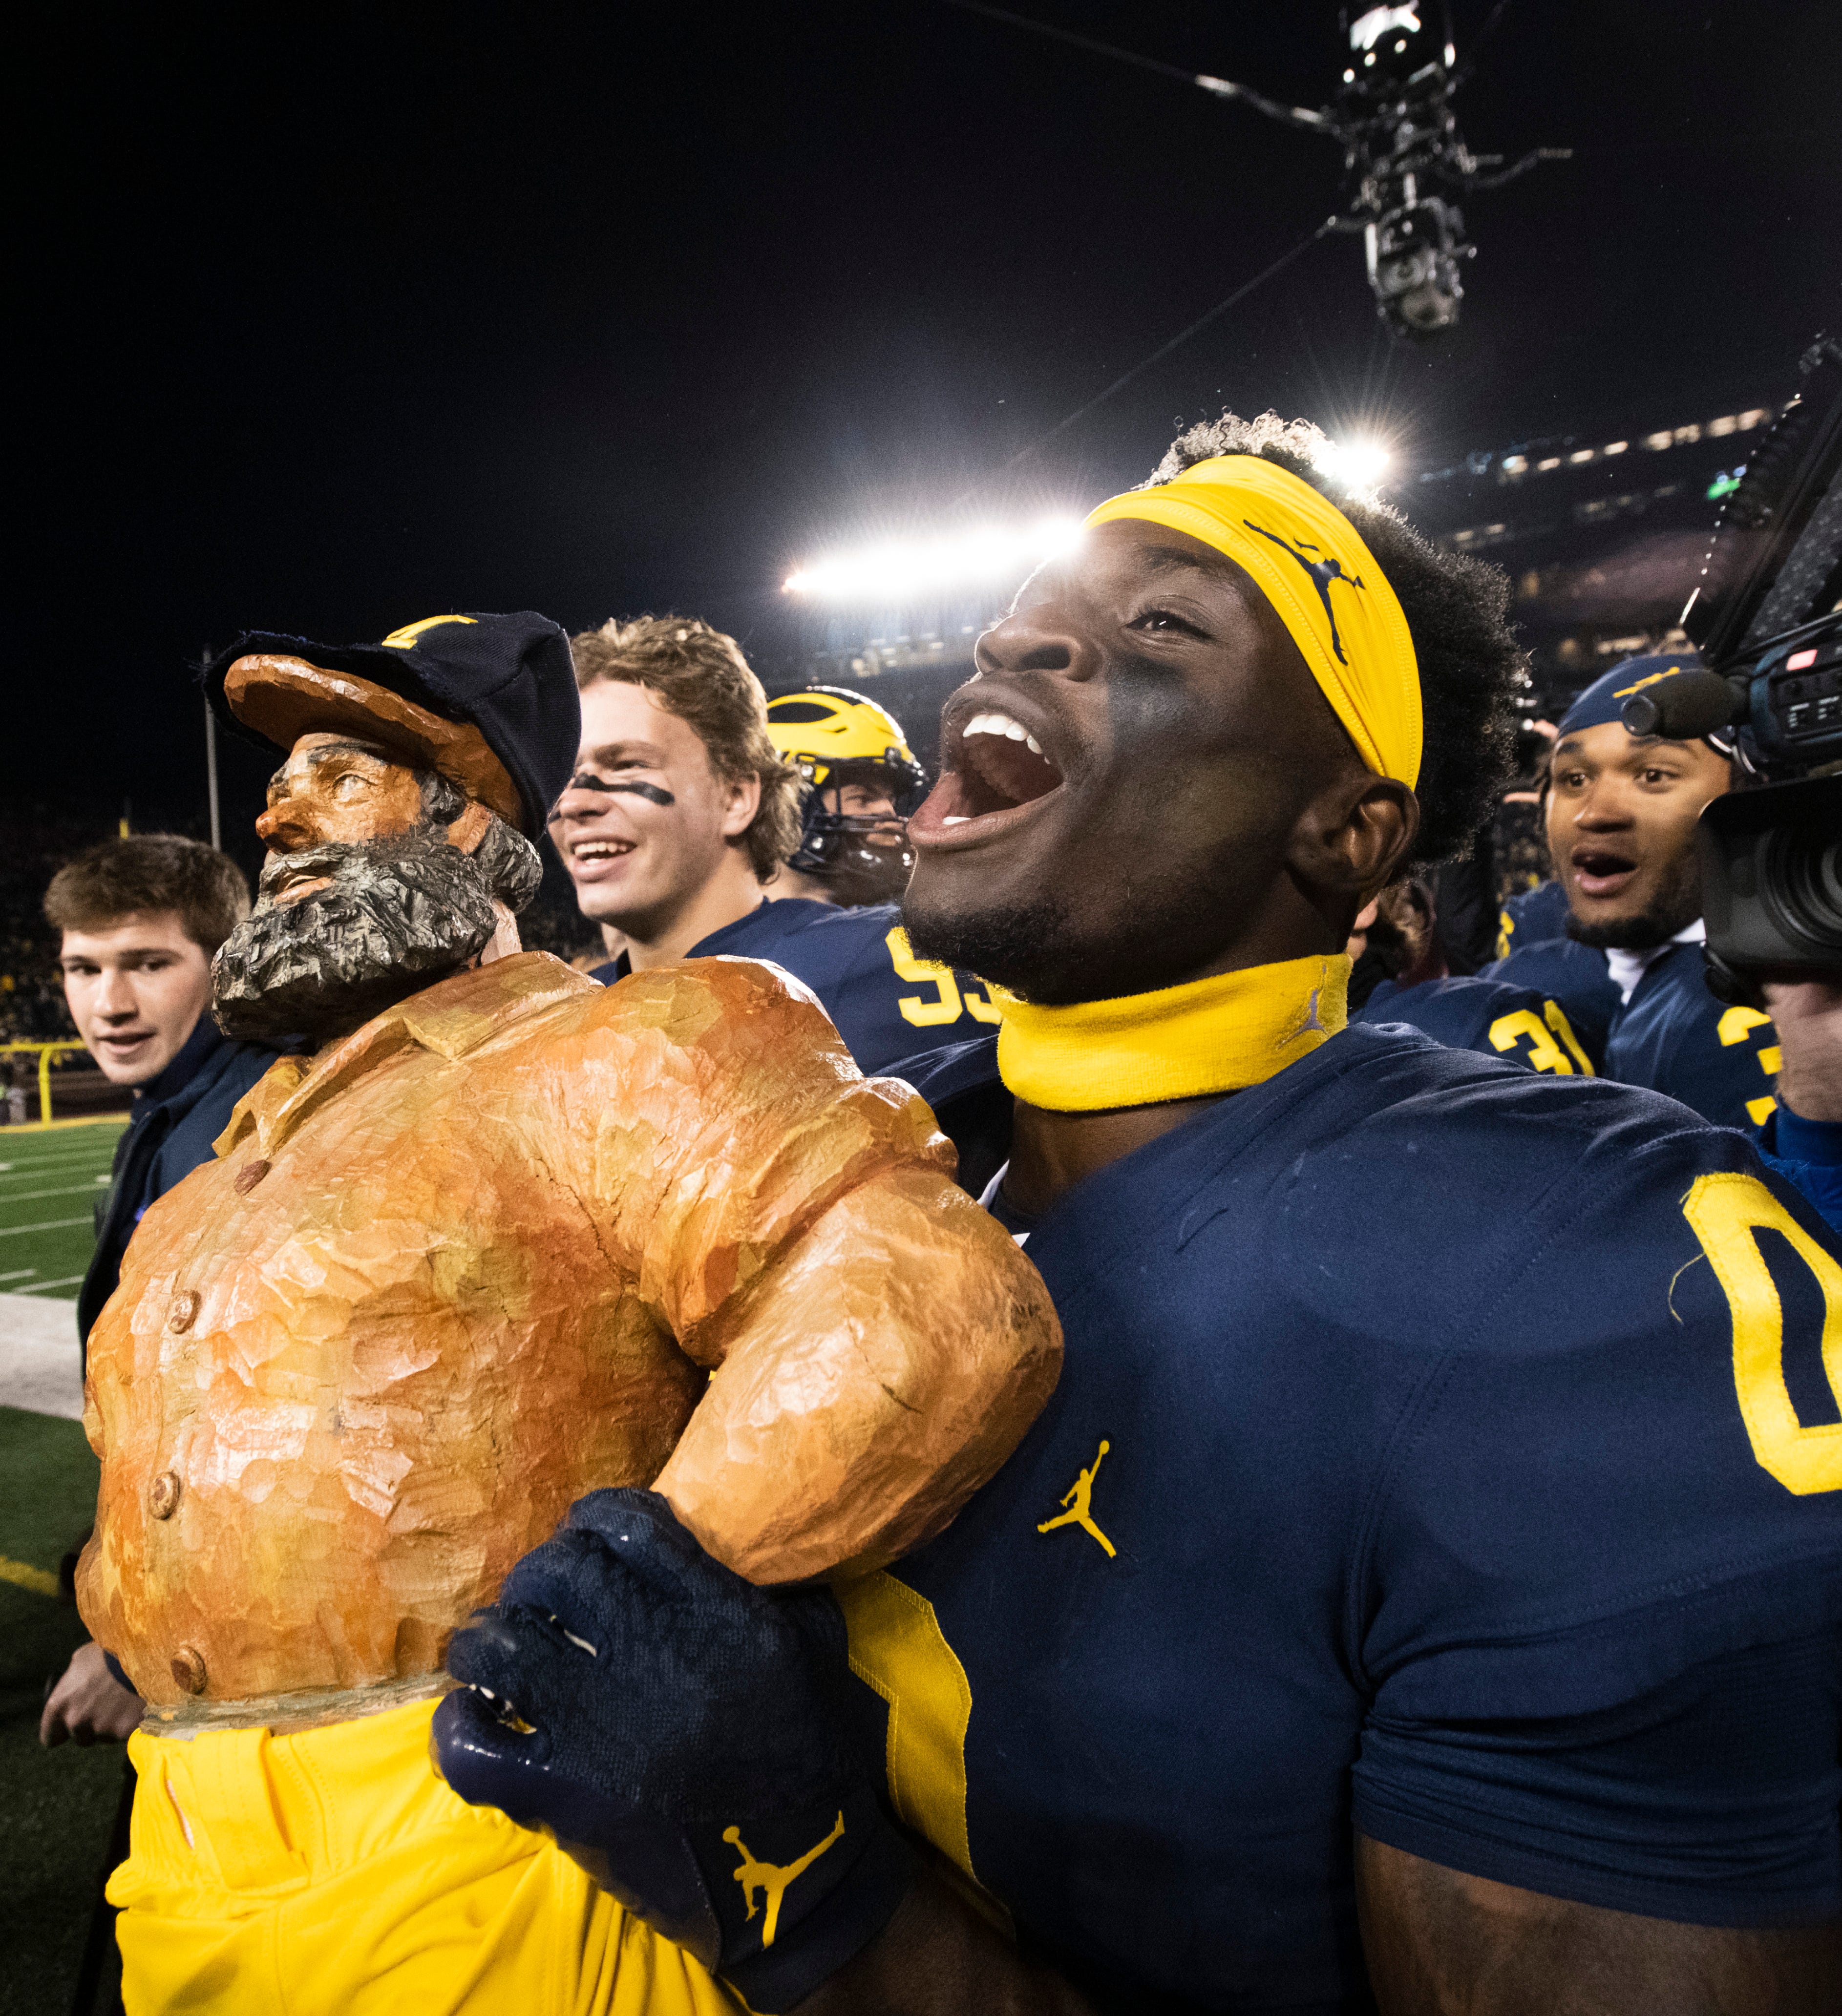 Michigan defensive back Mike Sainristil (0) carries the Paul Bunyan Trophy off the field after Michigan’s 29-7 victory over Michigan State in Ann Arbor. Michigan defeated Michigan State 29-7 in a college football game at Michigan Stadium in Ann Arbor, Michigan, Oct. 29, 2022.